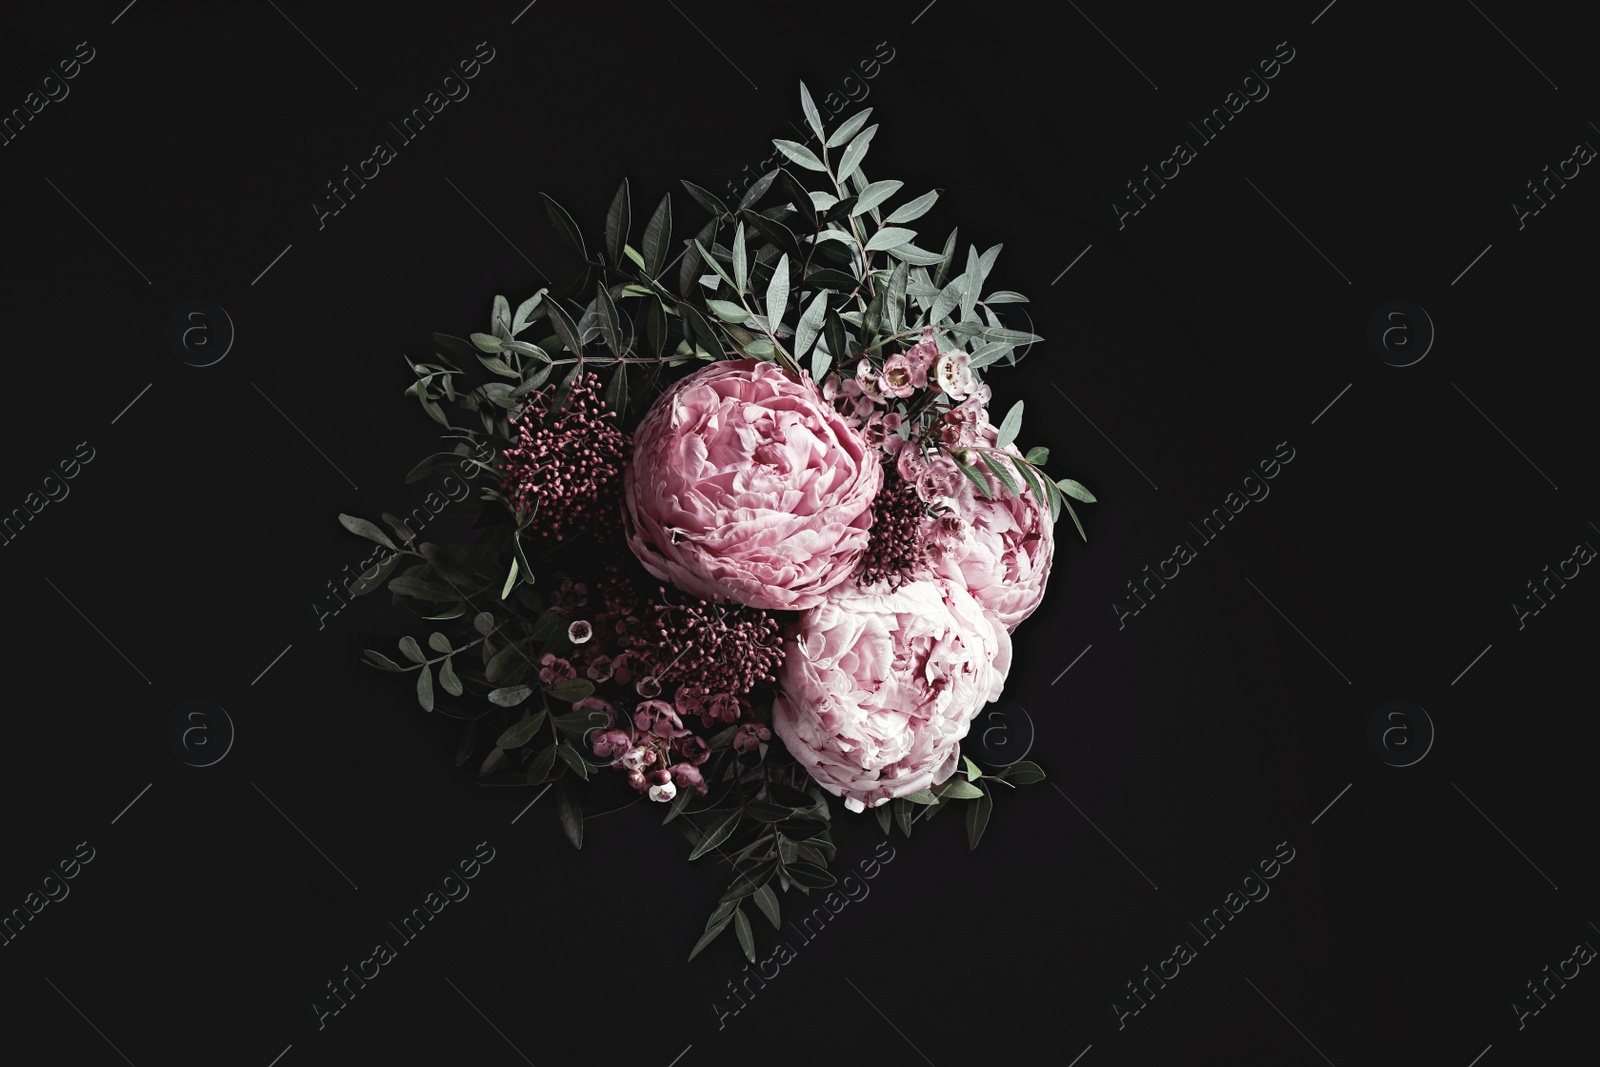 Photo of Bouquet of beautiful flowers on black background. Floral card design with dark vintage effect